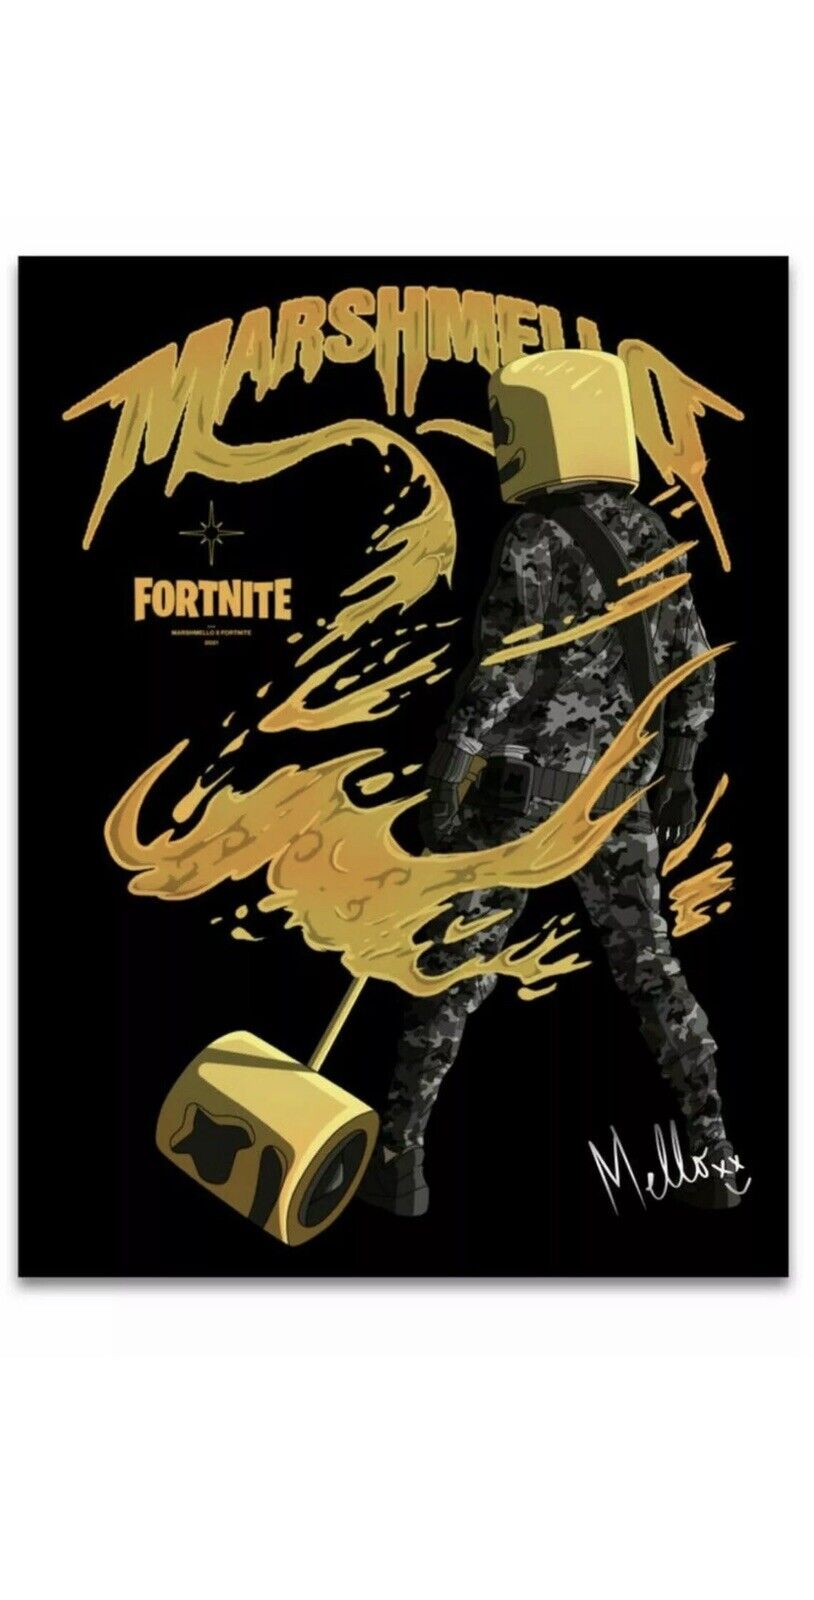 Fortnite X Marshmello Autographed Poster 1 Of 500 Limited Edition Signed  |  New